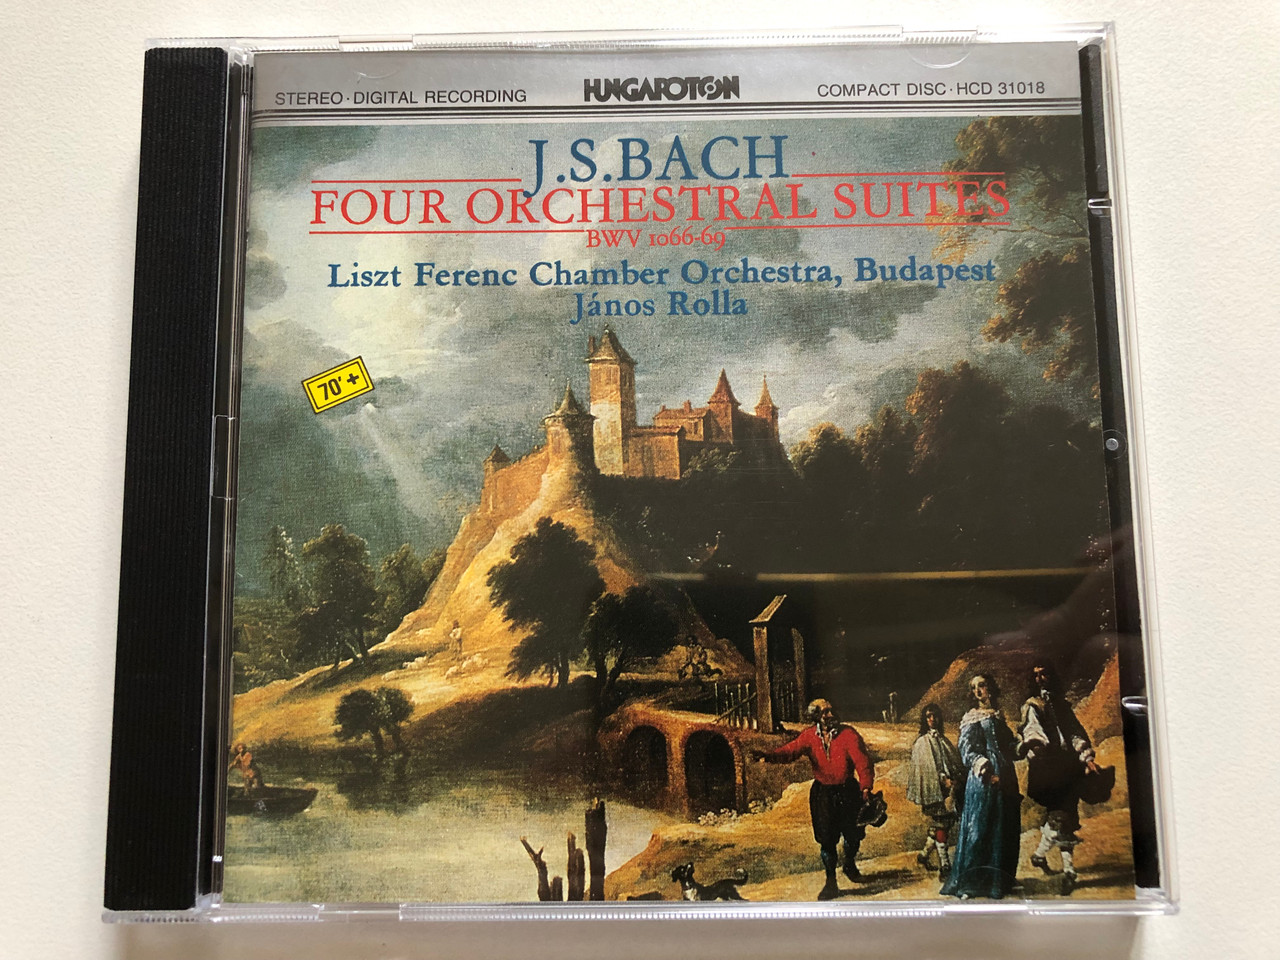 https://cdn10.bigcommerce.com/s-62bdpkt7pb/products/0/images/310996/J._S._Bach_Four_Orchestral_Suites_BWV_1066-69_-_Liszt_Ferenc_Chamber_OrchestraBudapest_Jnos_Rolla_Hungaroton_Audio_CD_1988_Stereo_HCD_31018_1__53499.1699464199.1280.1280.JPG?c=2